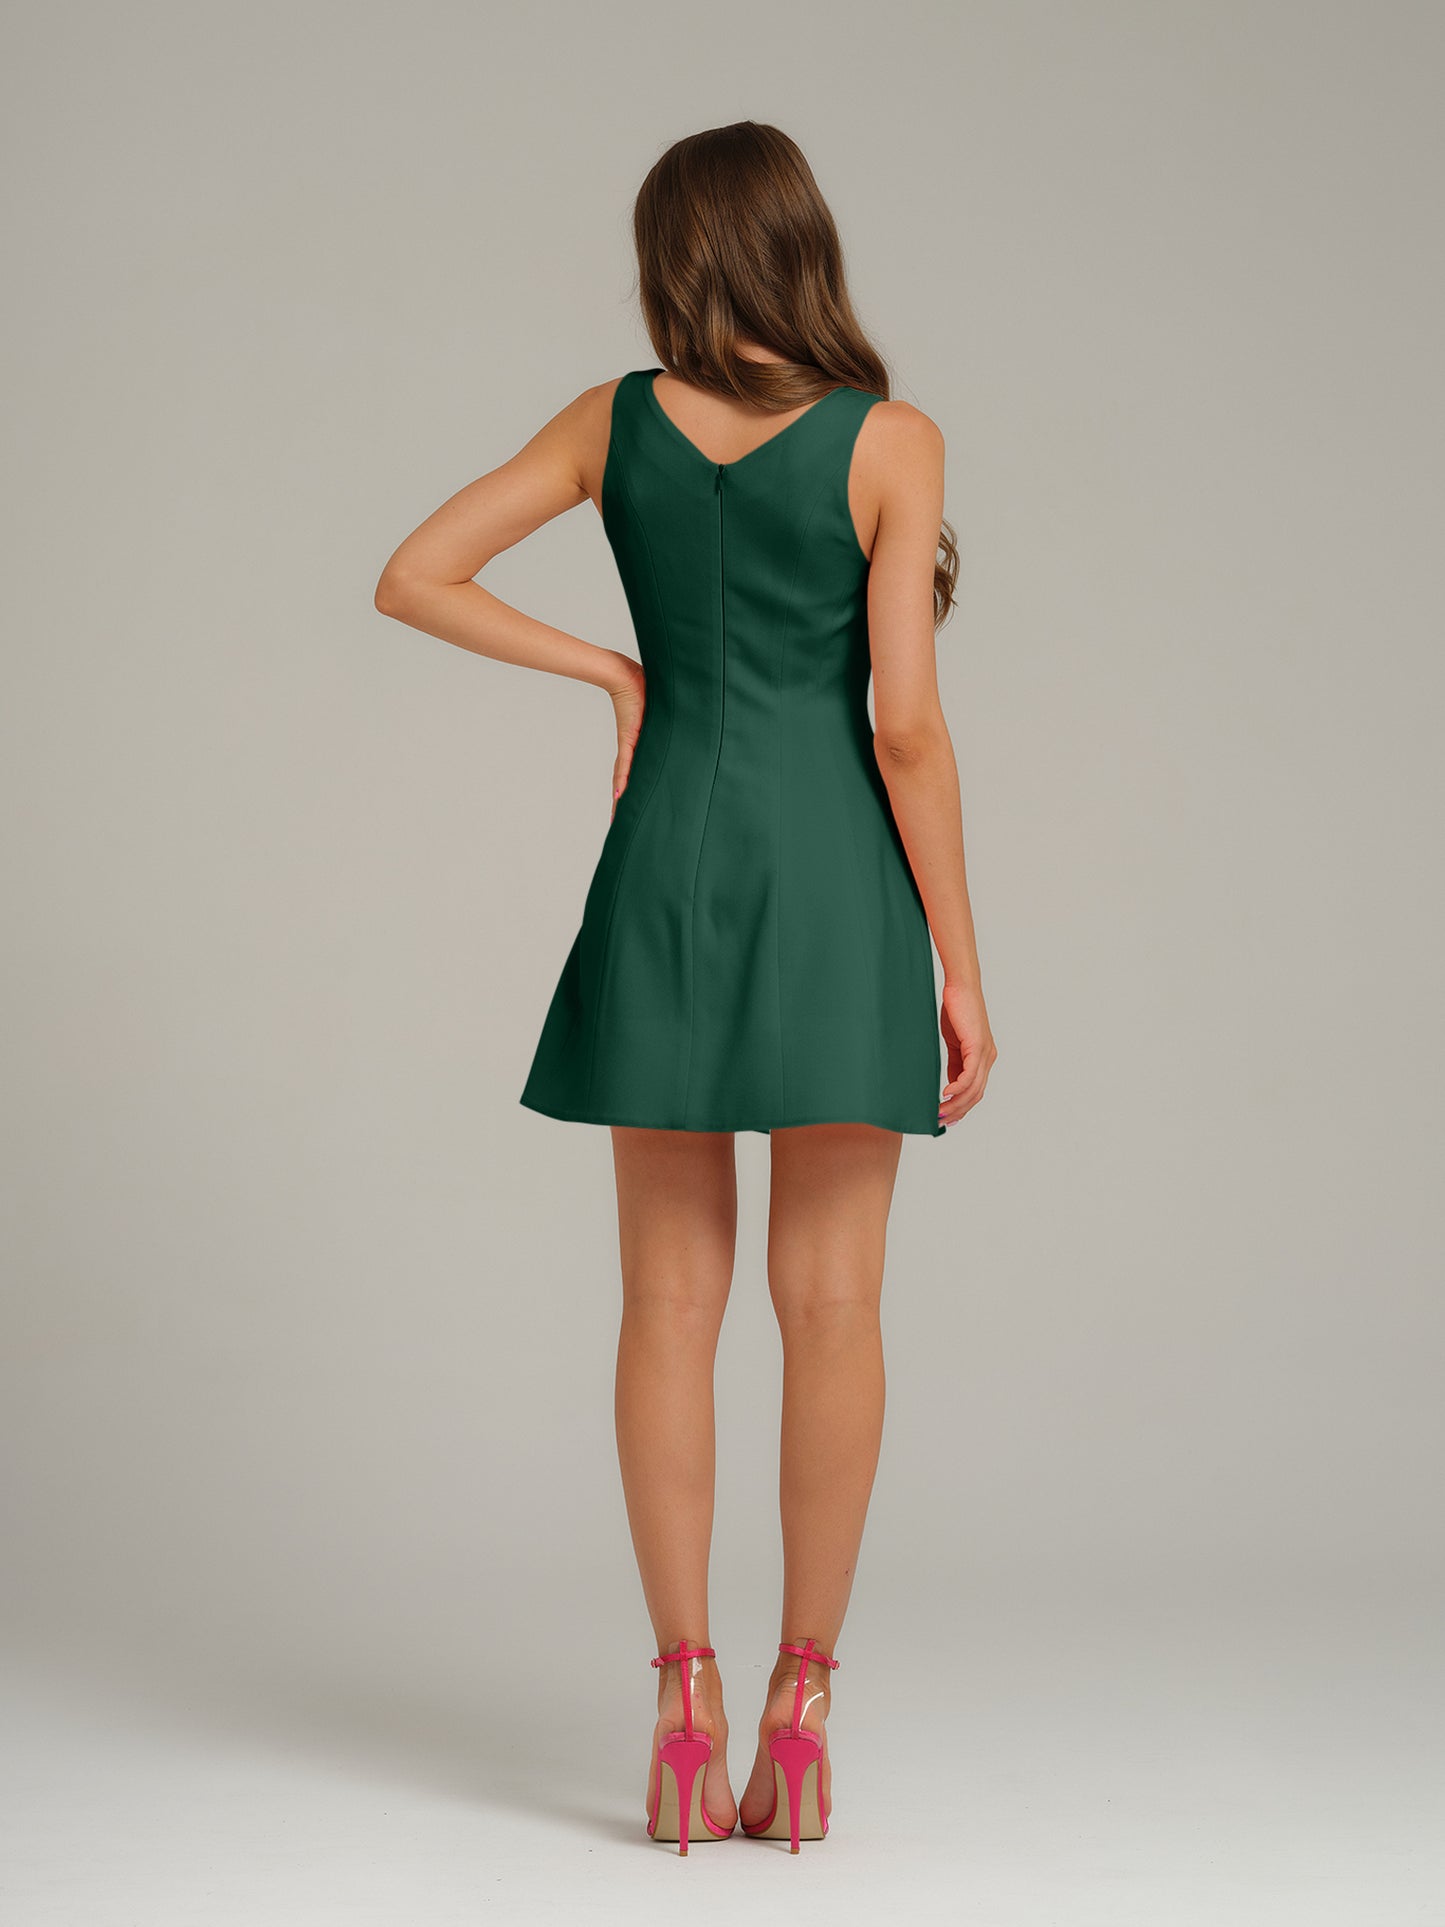 Tia DorraineLove Letter Flared Mini Dress - EmeraldBring an air of effortless femininity to your edits with this romantic mini dress. Its sleeveless silhouette is cut from stretch crepe, detailed with a flattering sweetheart neckline, and a flared skirt.